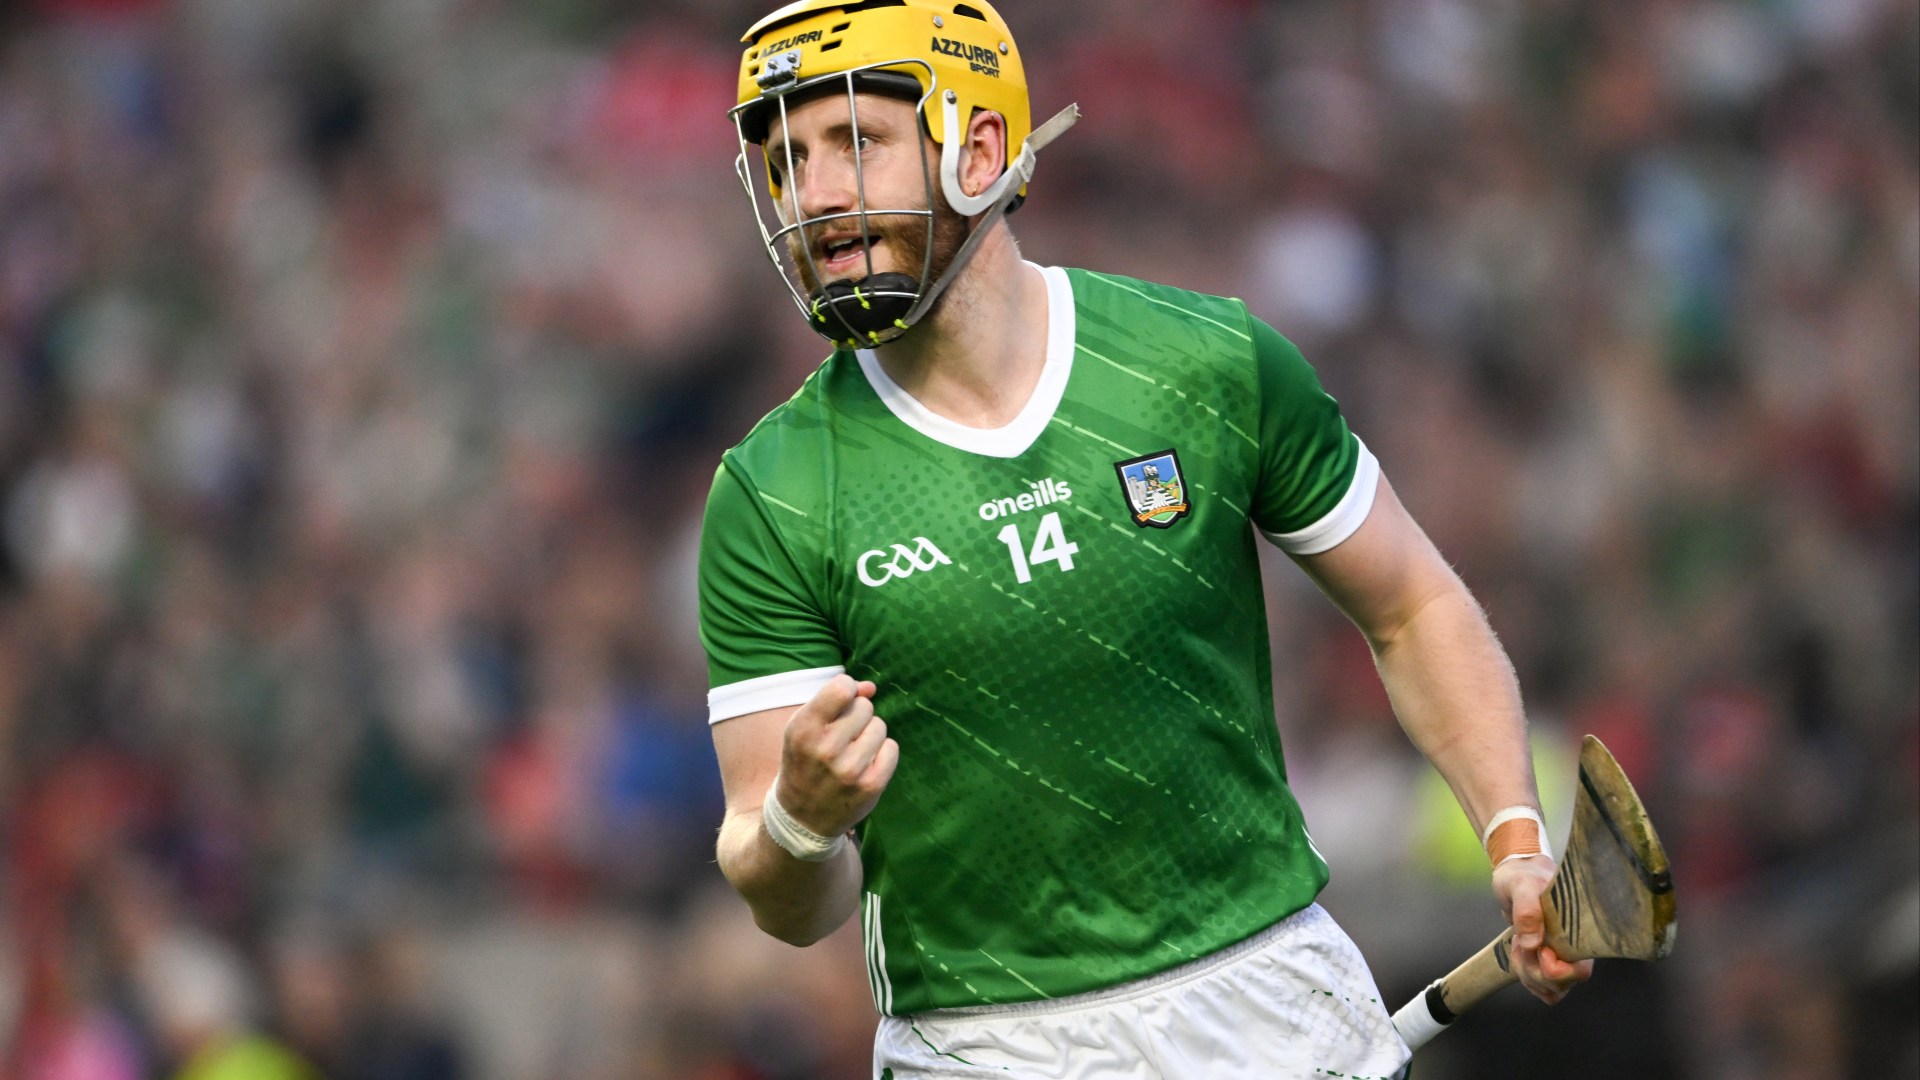 John Kiely provides worrying injury update on Seamus Flanagan as he makes ‘highly unlikely’ admission [Video]